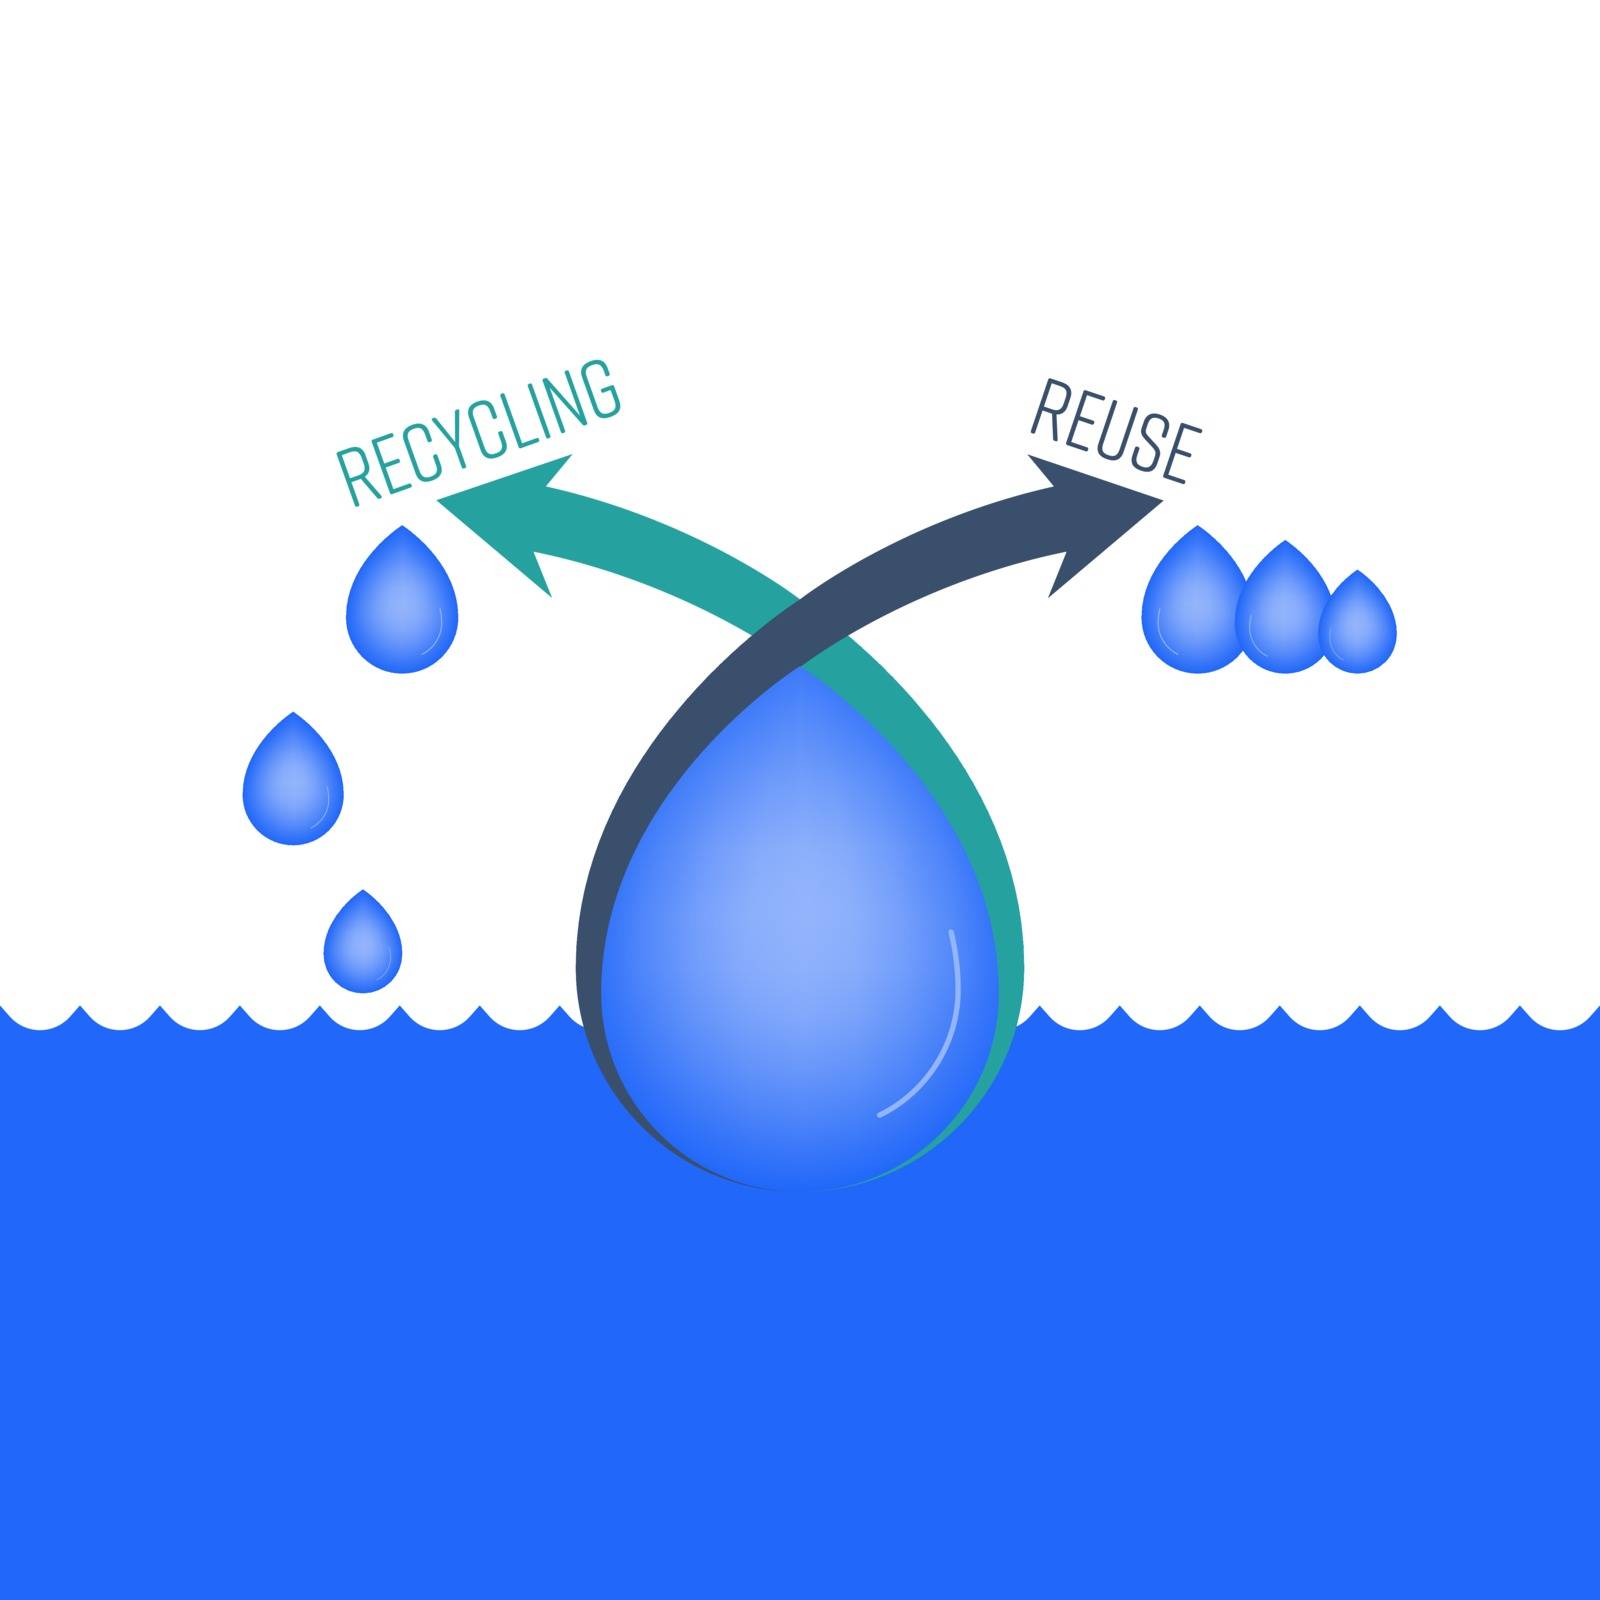 Water recycling and reuse with drop icon and arrow as a gimmick. Water conservation concept. Vector illustration.